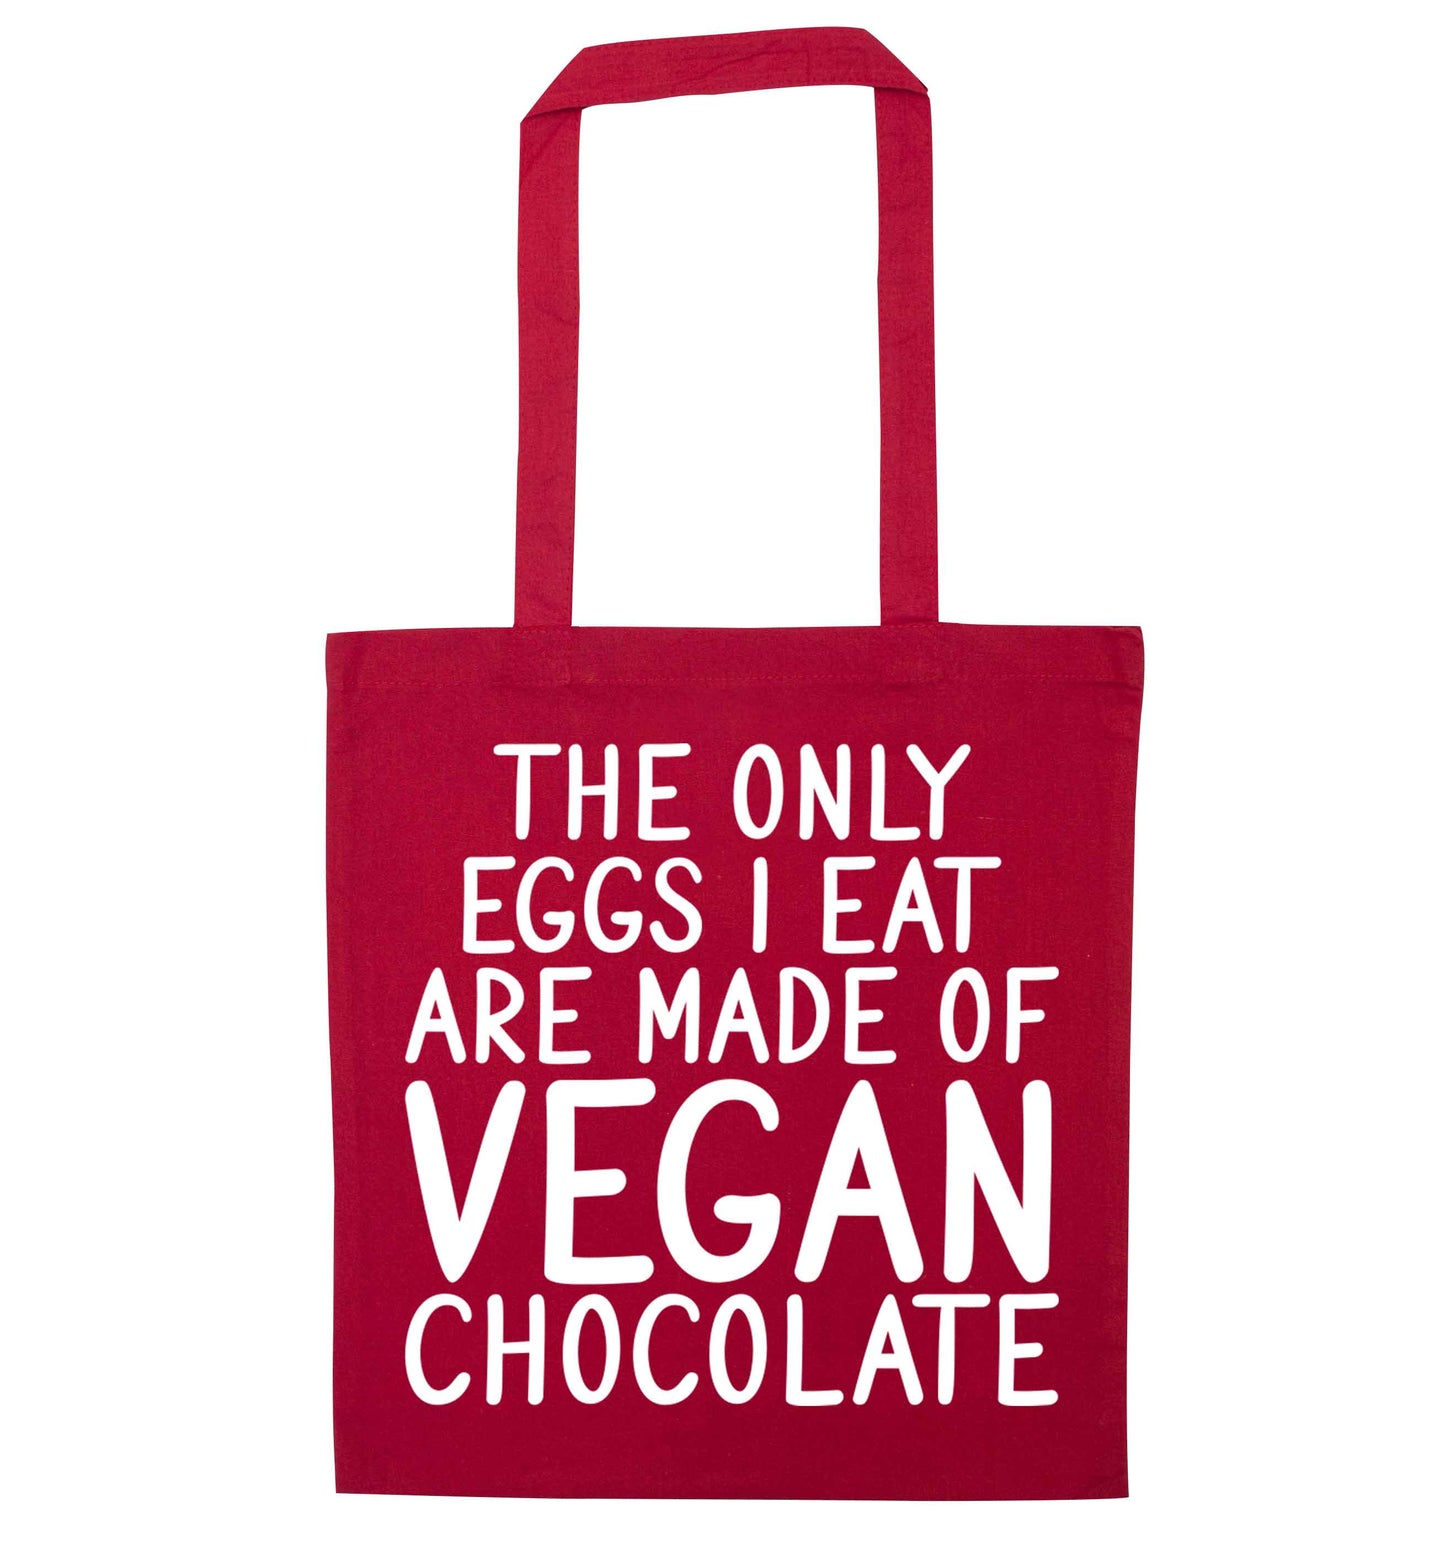 The only eggs I eat are made of vegan chocolate red tote bag